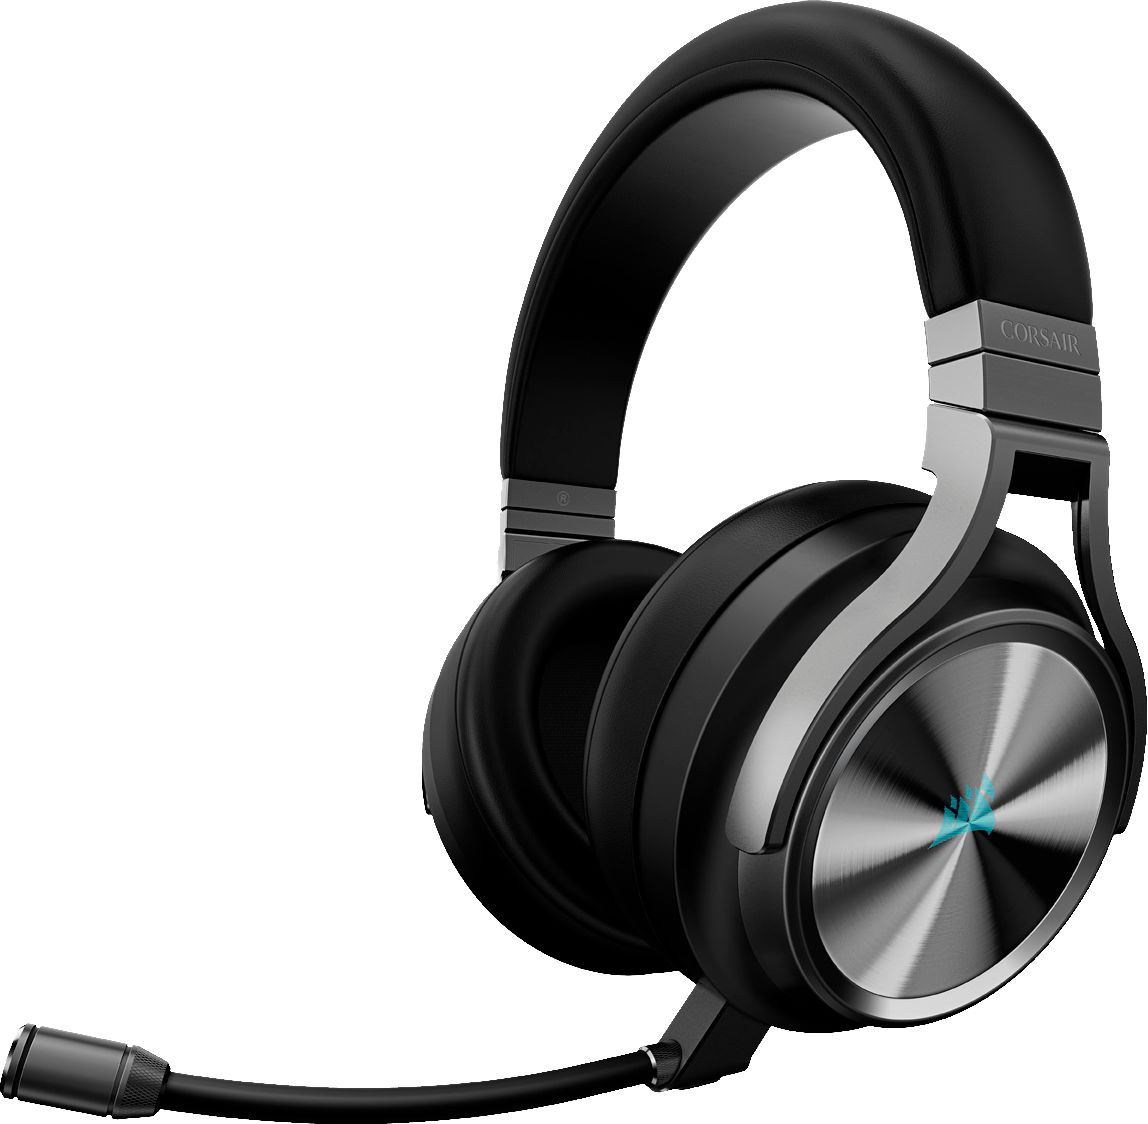 Left View: CORSAIR - VIRTUOSO RGB SE Wireless 7.1 Surround Sound Gaming Over-the-Ear Headset for PC/Mac, Game Consoles, and Mobile - Gunmetal